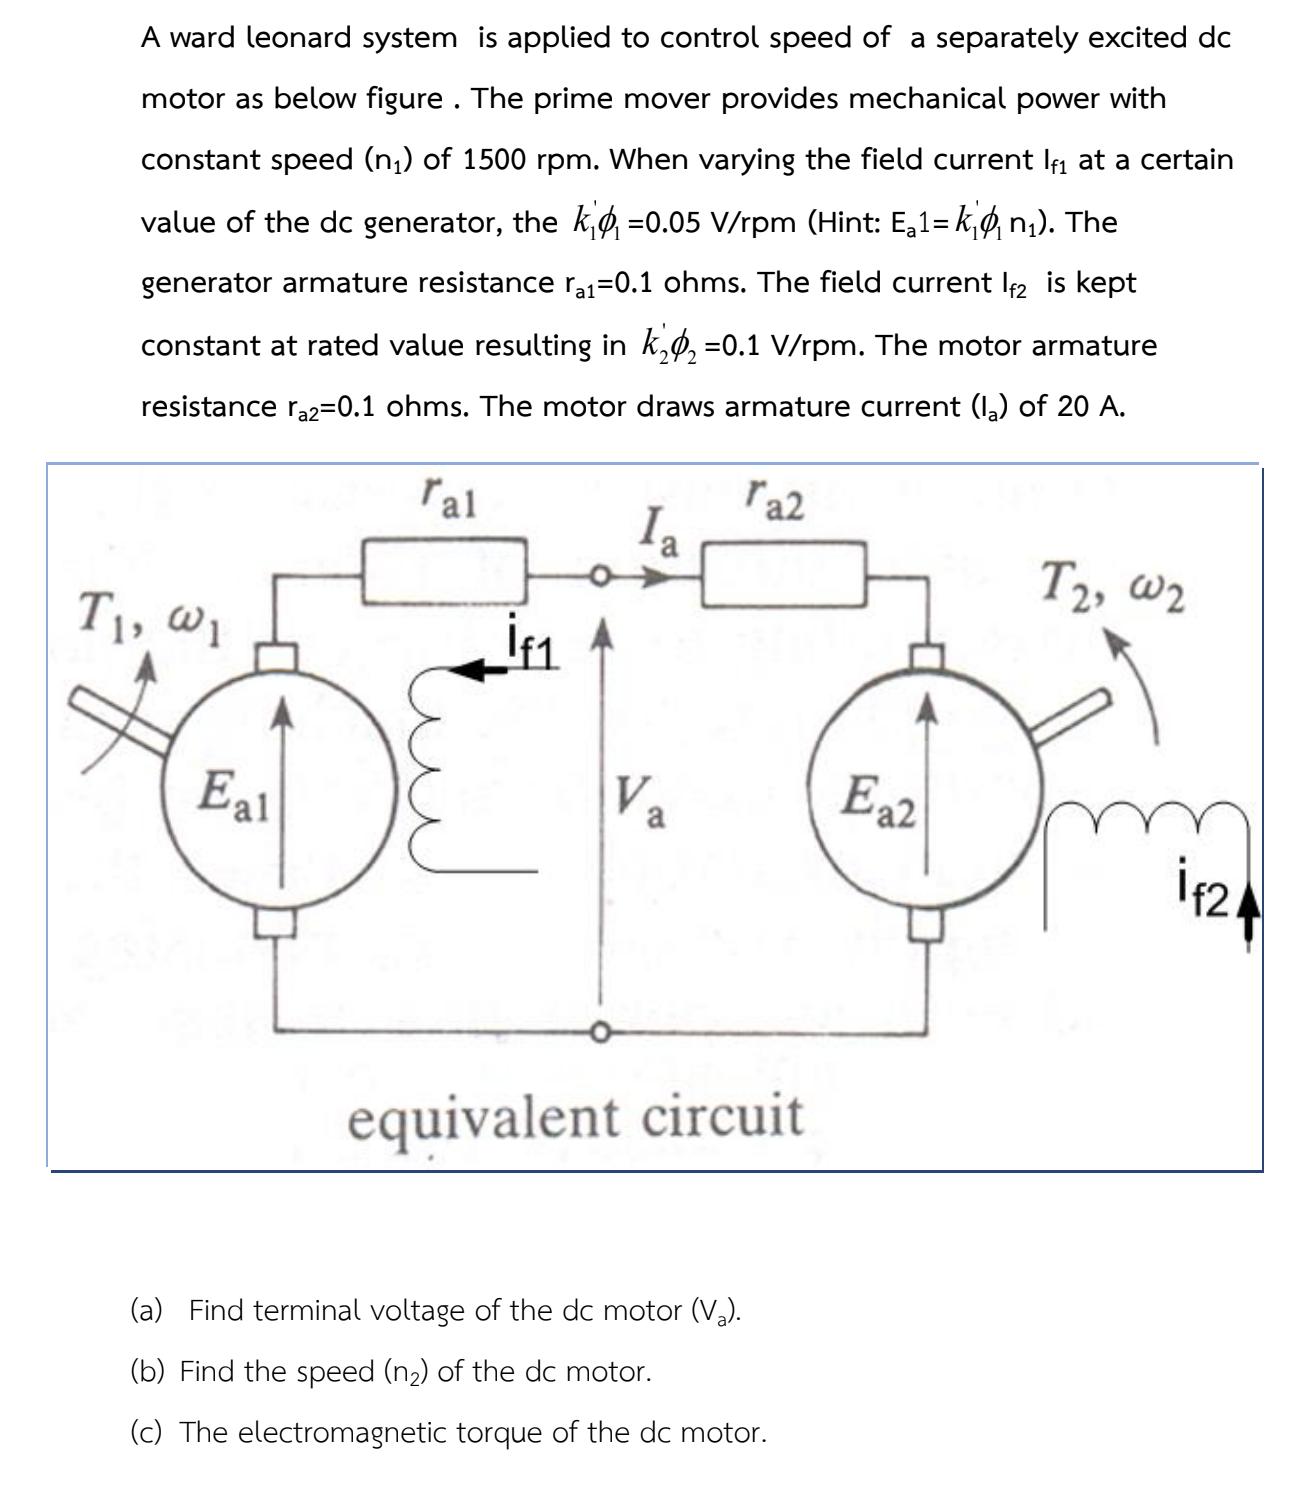 A ward leonard system is applied to control speed of a separately excited dc motor as below figure. The prime